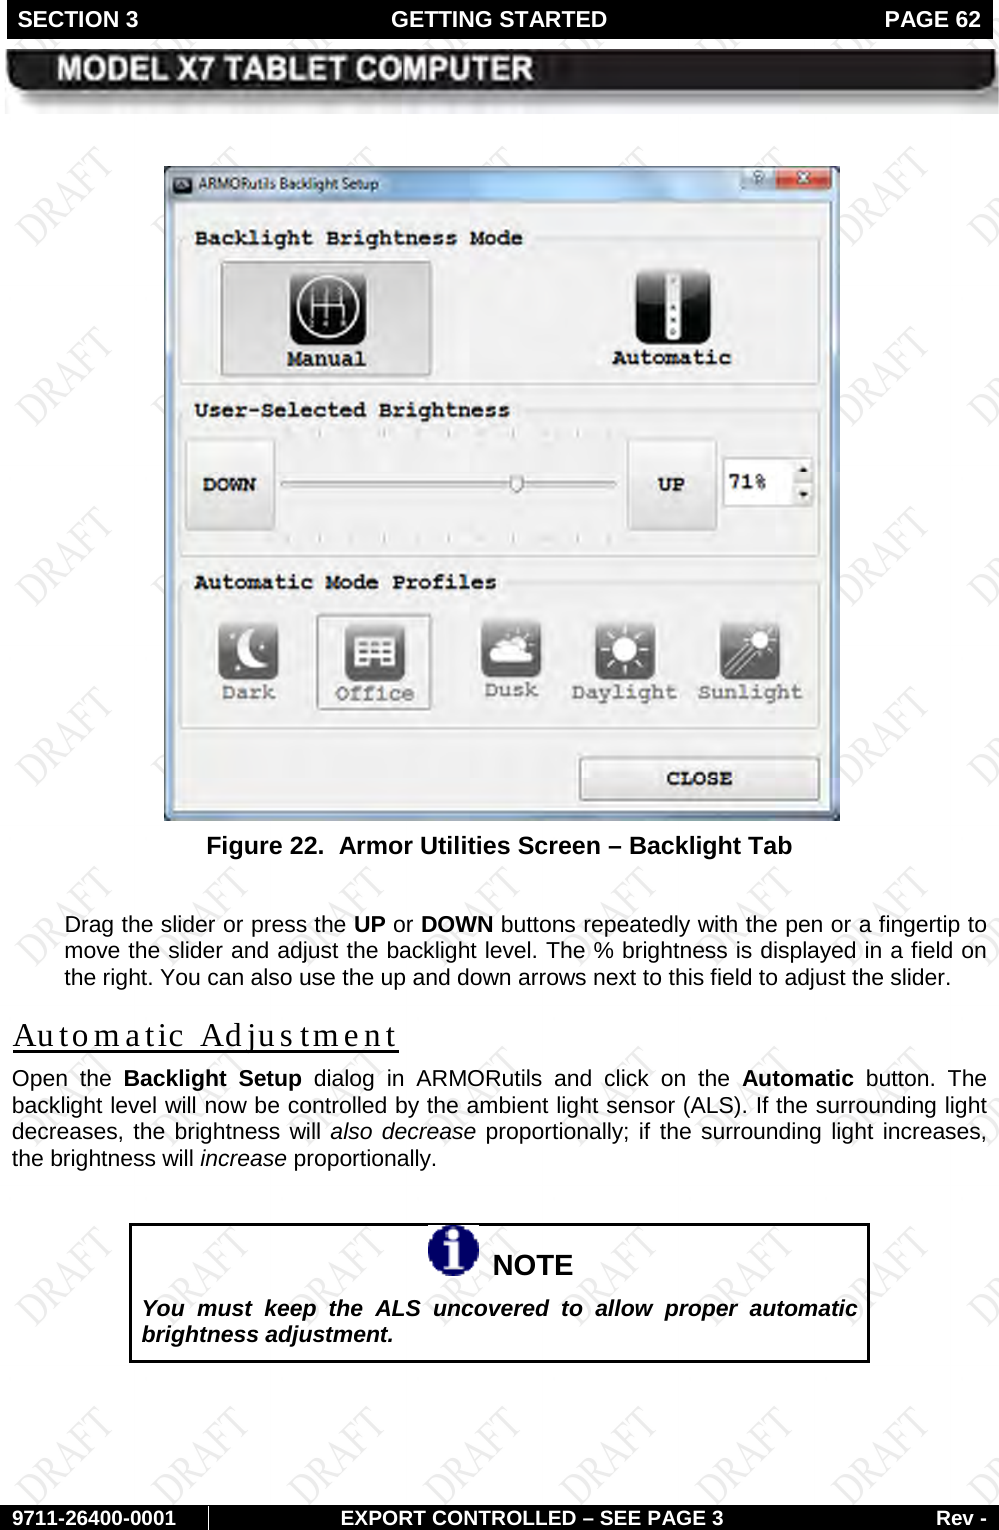 SECTION 3 GETTING STARTED  PAGE 62        9711-26400-0001 EXPORT CONTROLLED – SEE PAGE 3 Rev -   Figure 22.  Armor Utilities Screen – Backlight Tab  Drag the slider or press the UP or DOWN buttons repeatedly with the pen or a fingertip to move the slider and adjust the backlight level. The % brightness is displayed in a field on the right. You can also use the up and down arrows next to this field to adjust the slider. Open the Backlight Setup dialog in ARMORutils and click on the Automatic button.  The backlight level will now be controlled by the ambient light sensor (ALS). If the surrounding light decreases, the brightness will also decrease proportionally; if the surrounding light increases, the brightness will increase proportionally. Automatic Adjustment    NOTE You must keep the ALS uncovered to allow proper automatic brightness adjustment.  